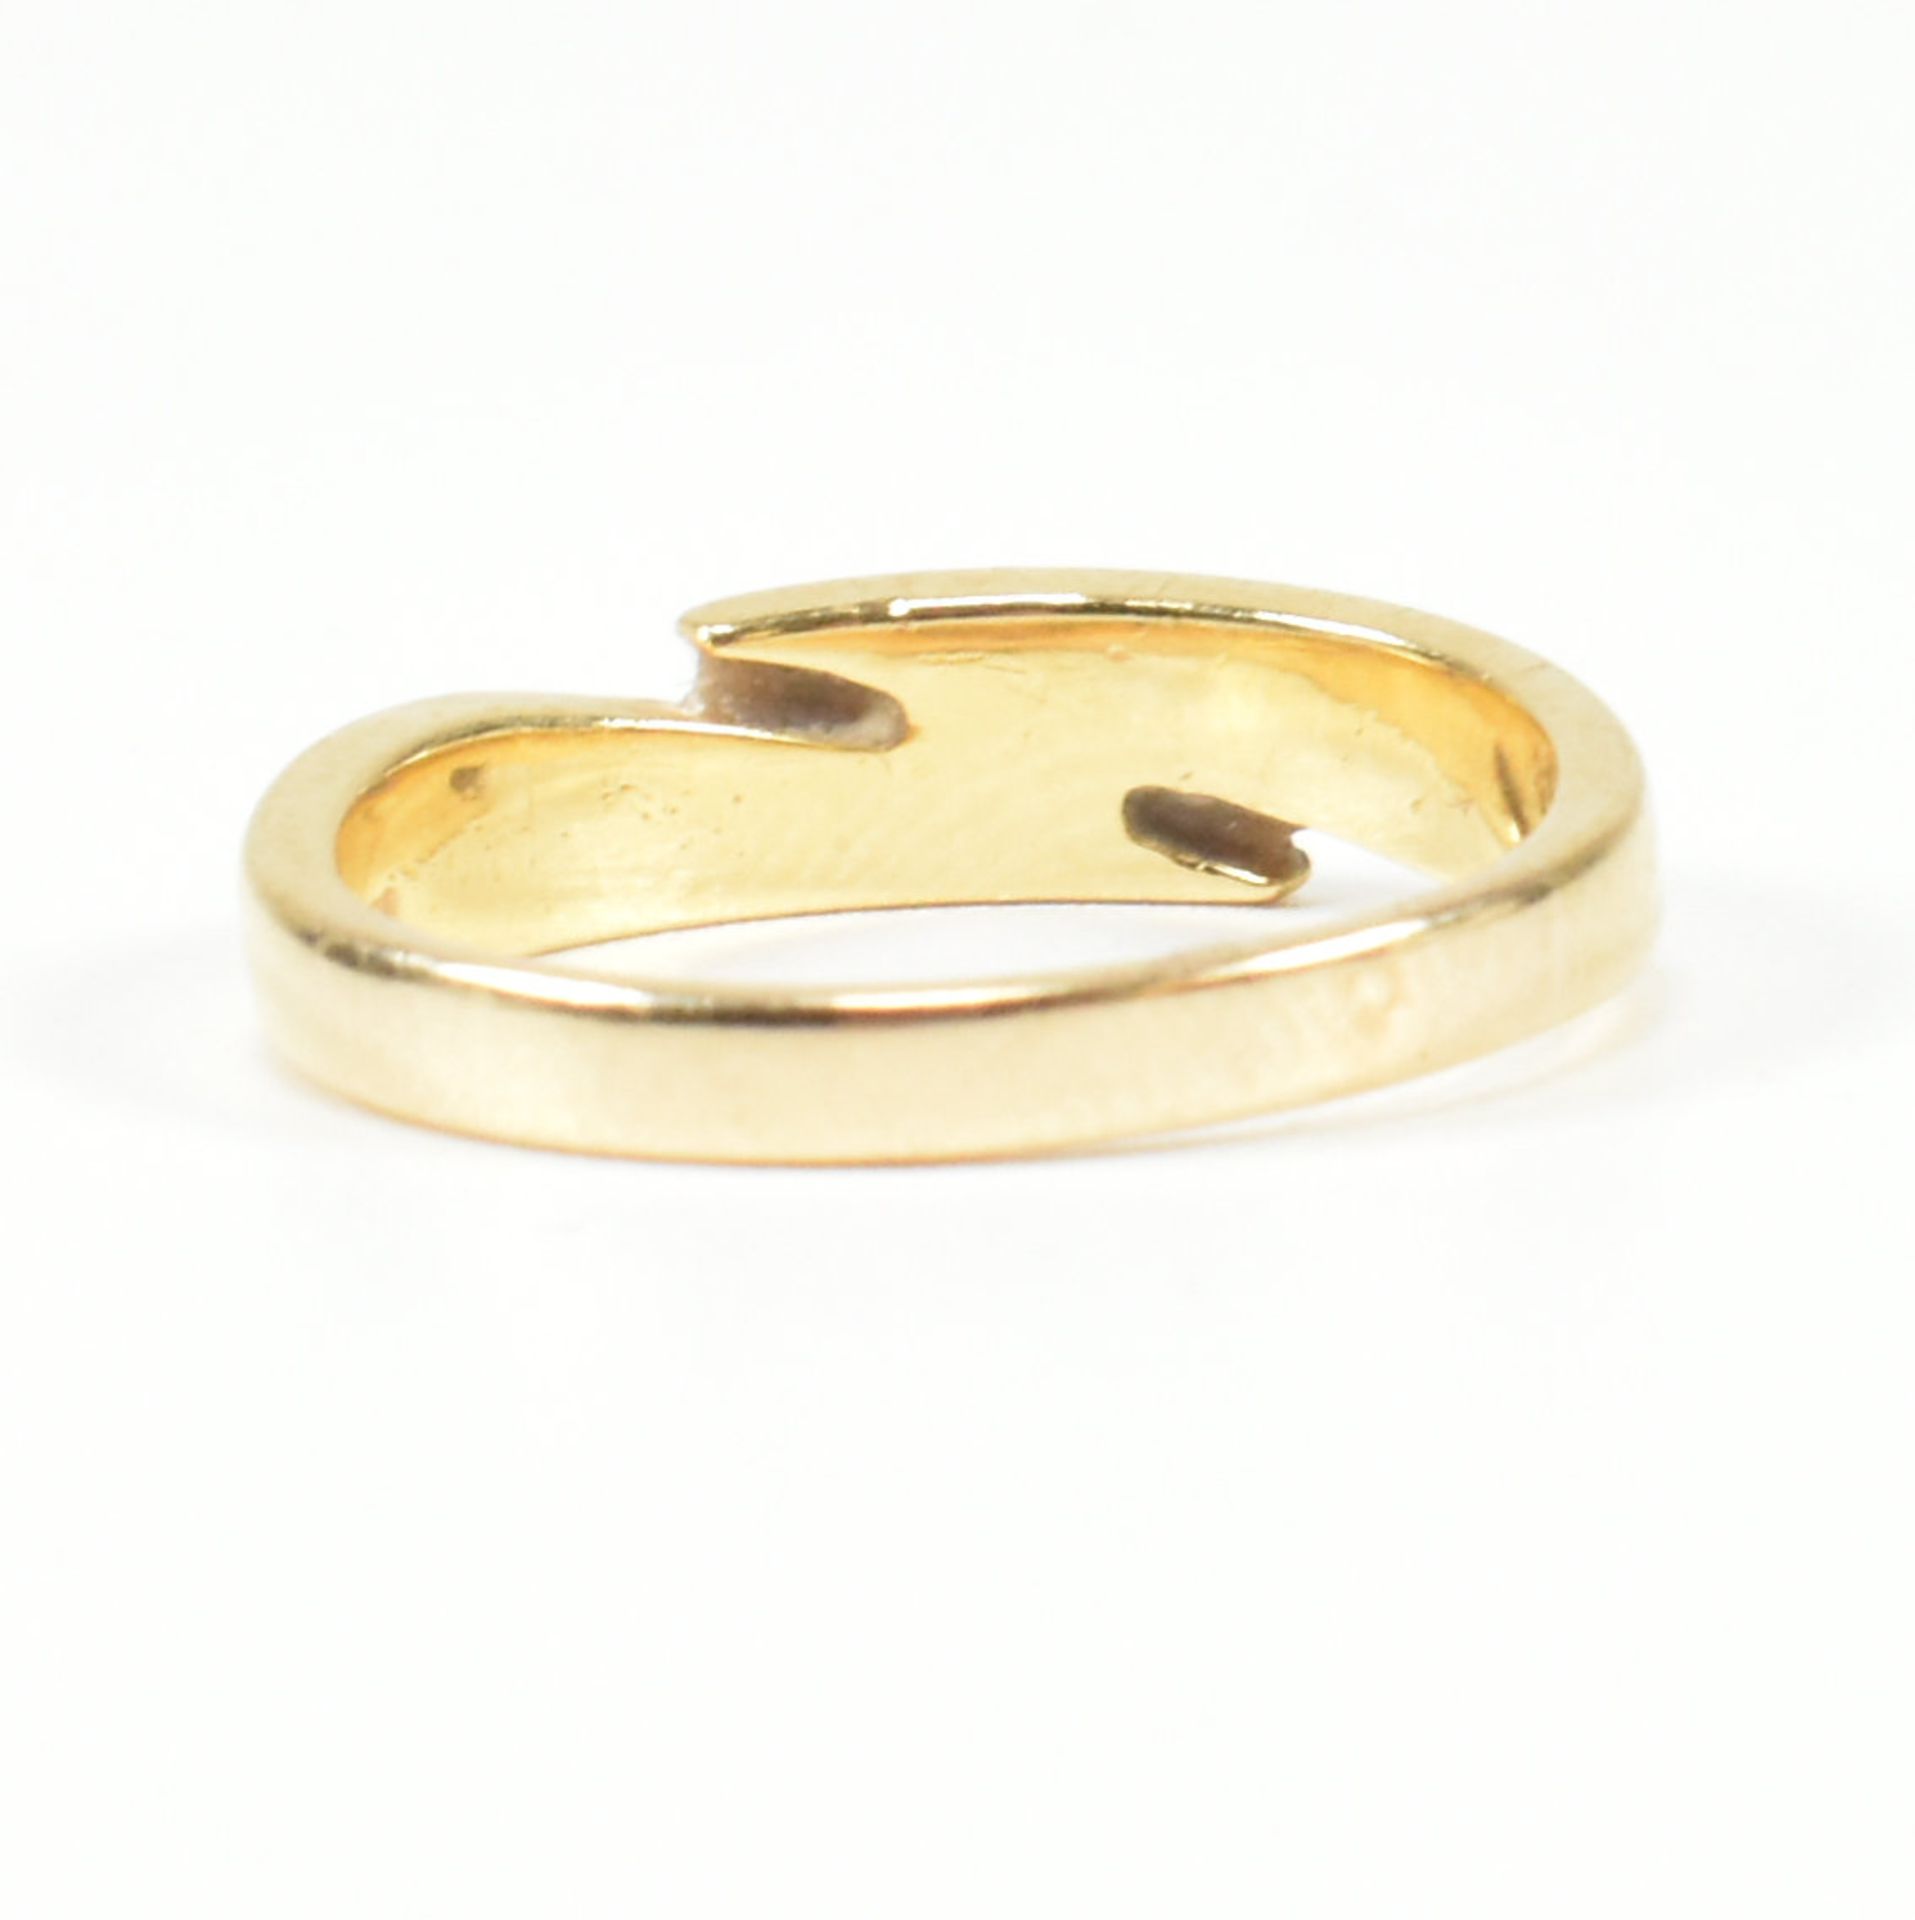 18CT GOLD & DIAMOND CROSSOVER BAND RING - Image 5 of 8